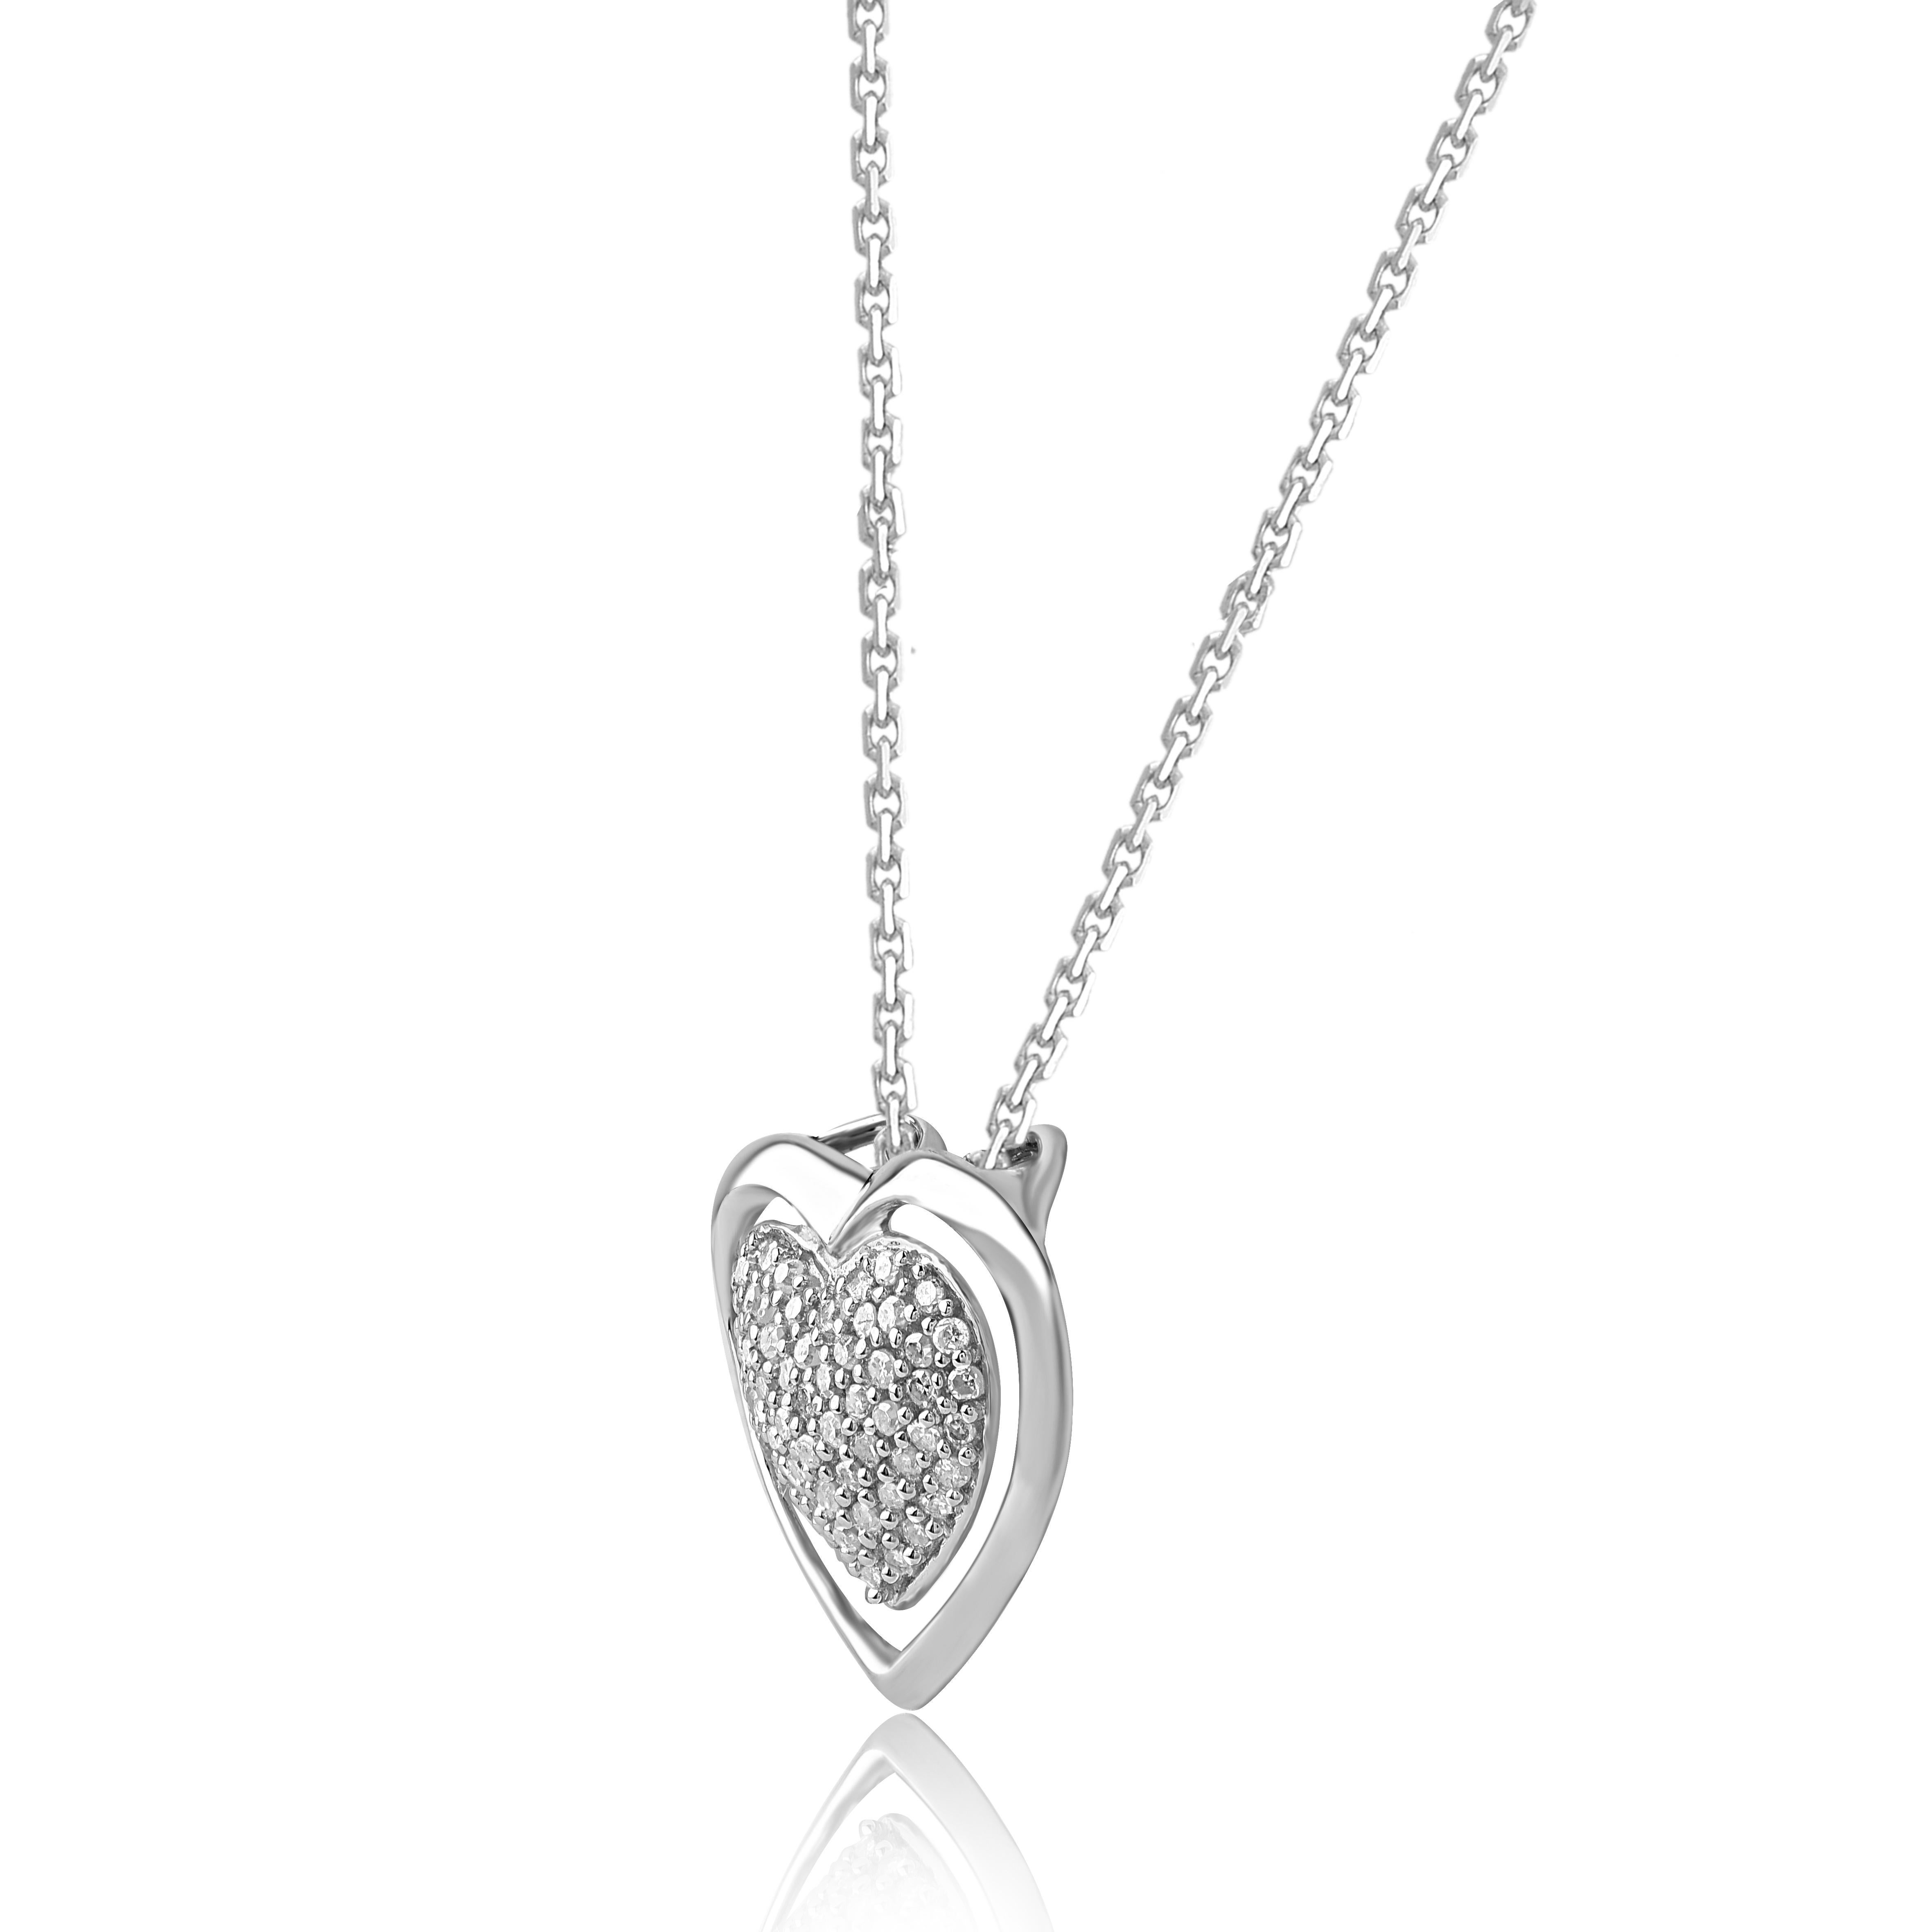 Bring charm to your look with this diamond heart pendant necklace. The pendant is crafted from 14 karat white gold and features 60 round single cut diamond set in prong setting and a high polish finish complete the brilliant sophistication of this